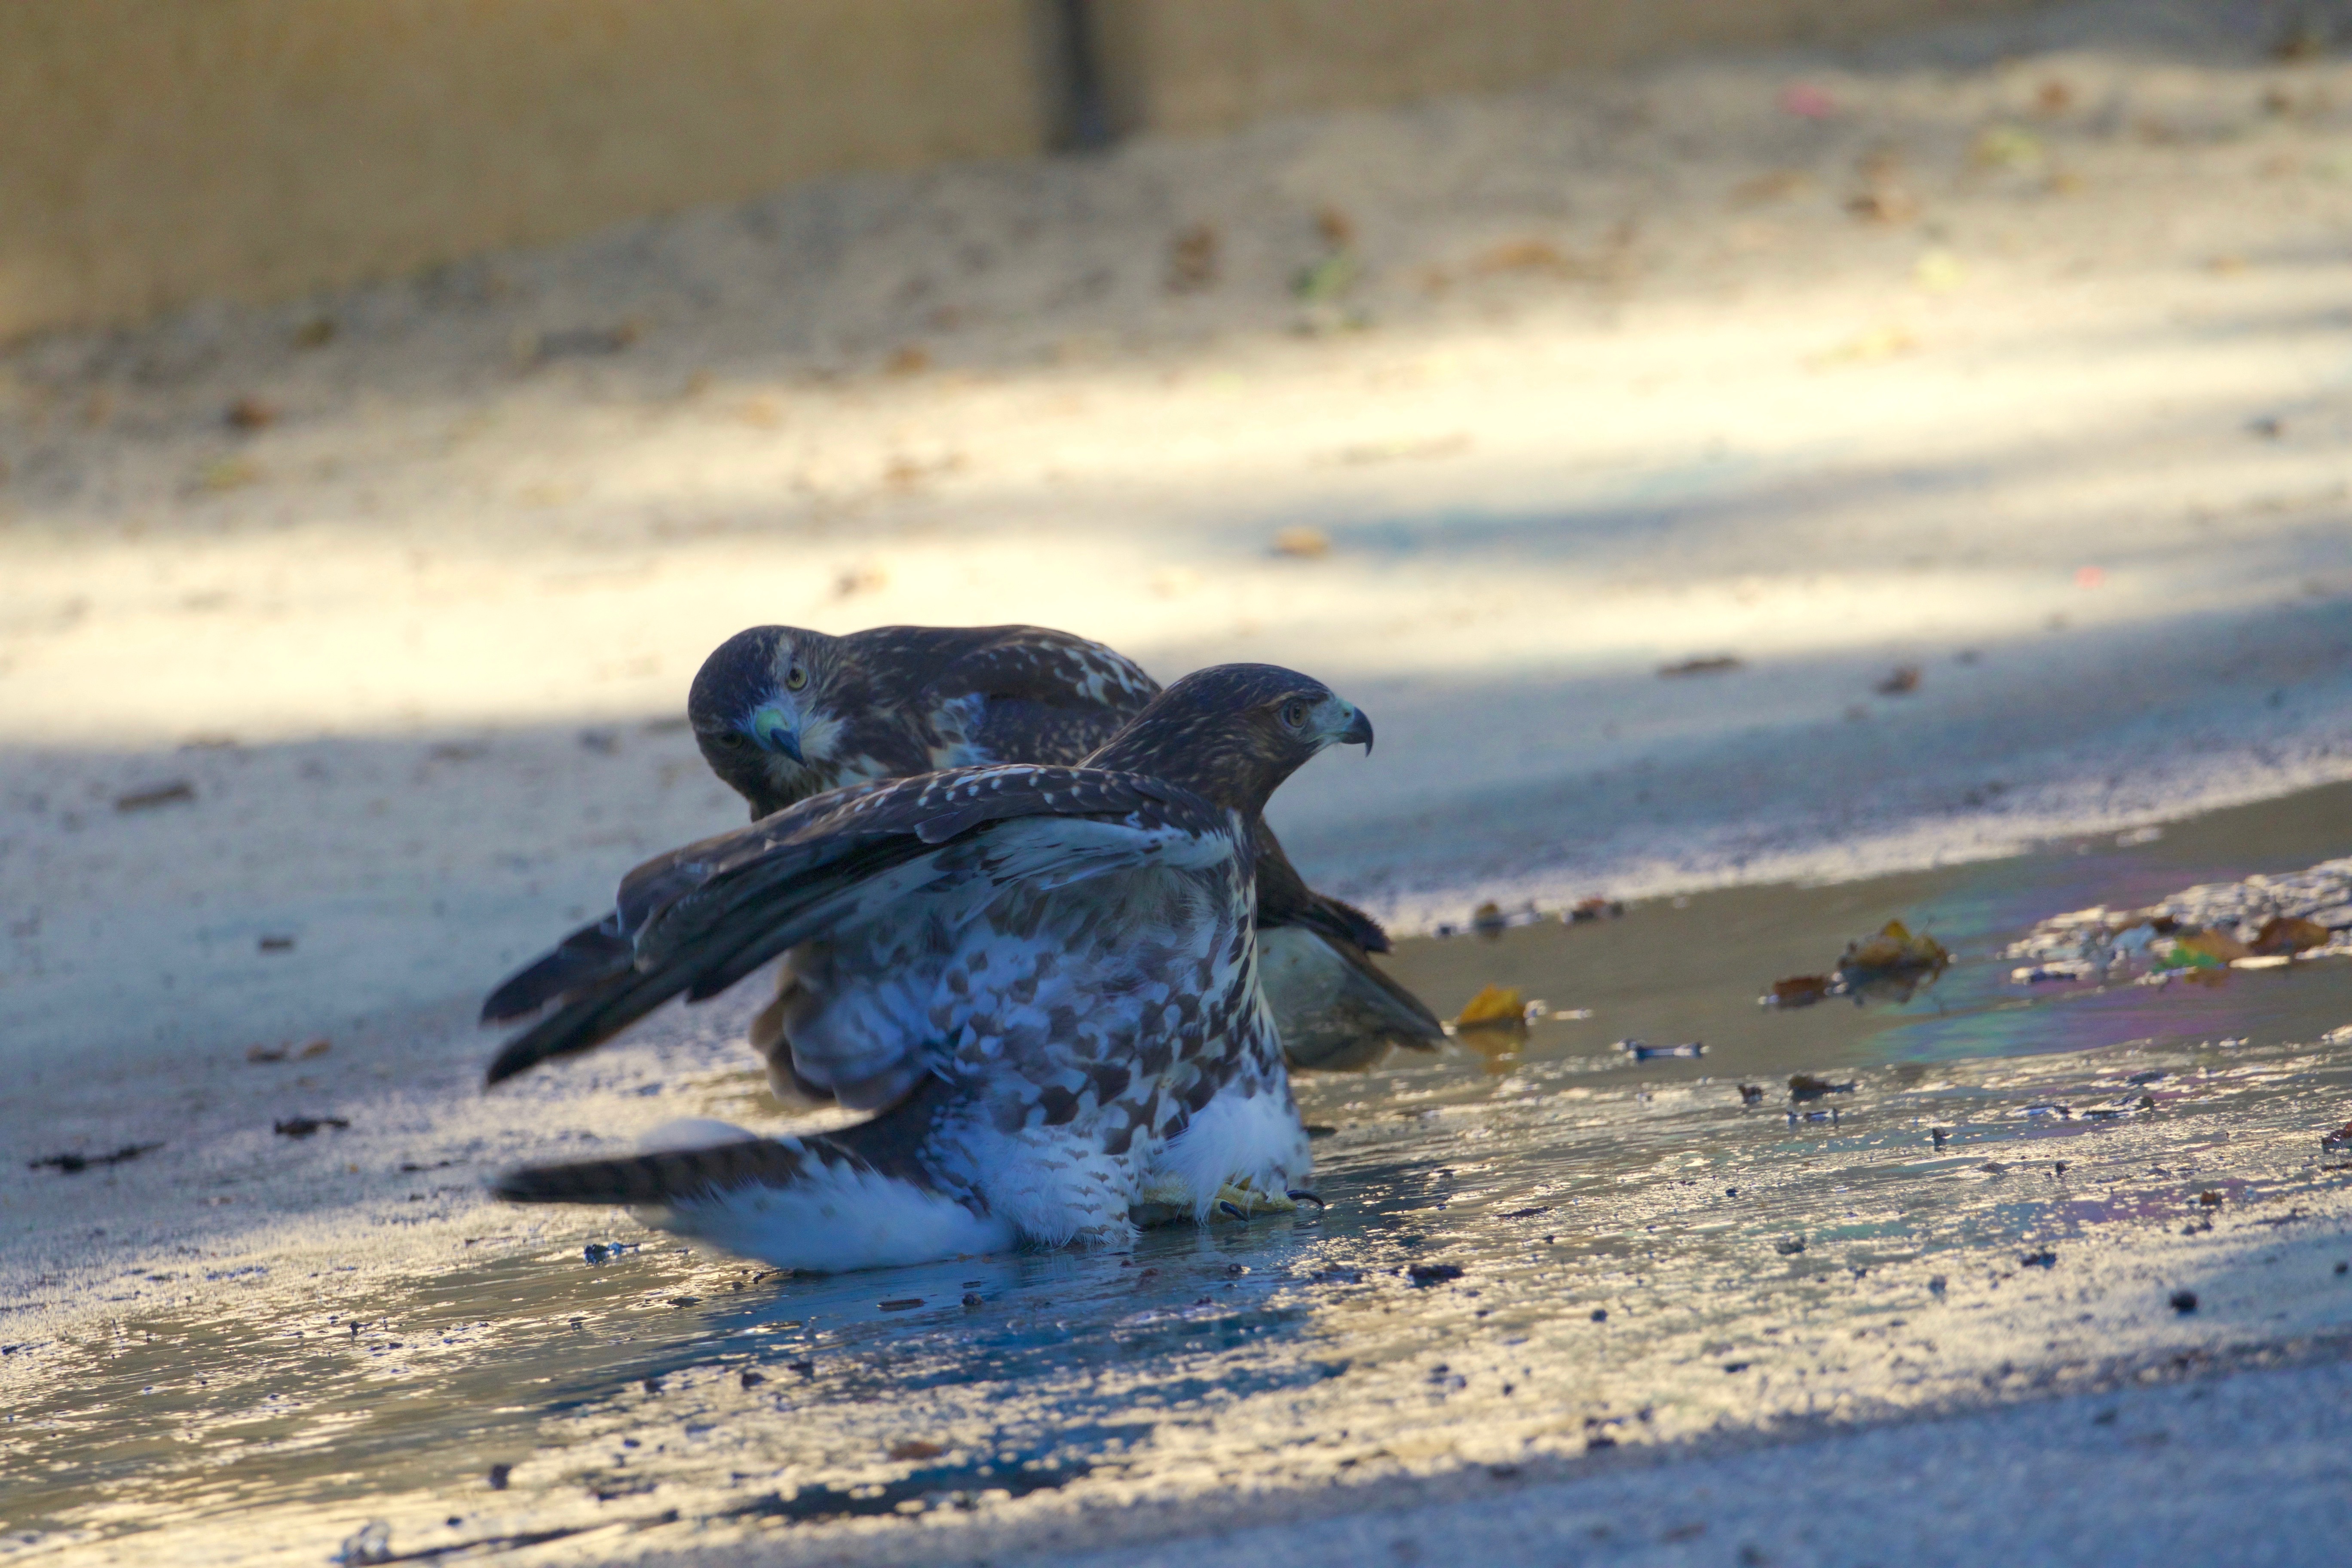 Young Red-tailed Hawks bathe in Tompkins Square Park. Photo: Jean Shum